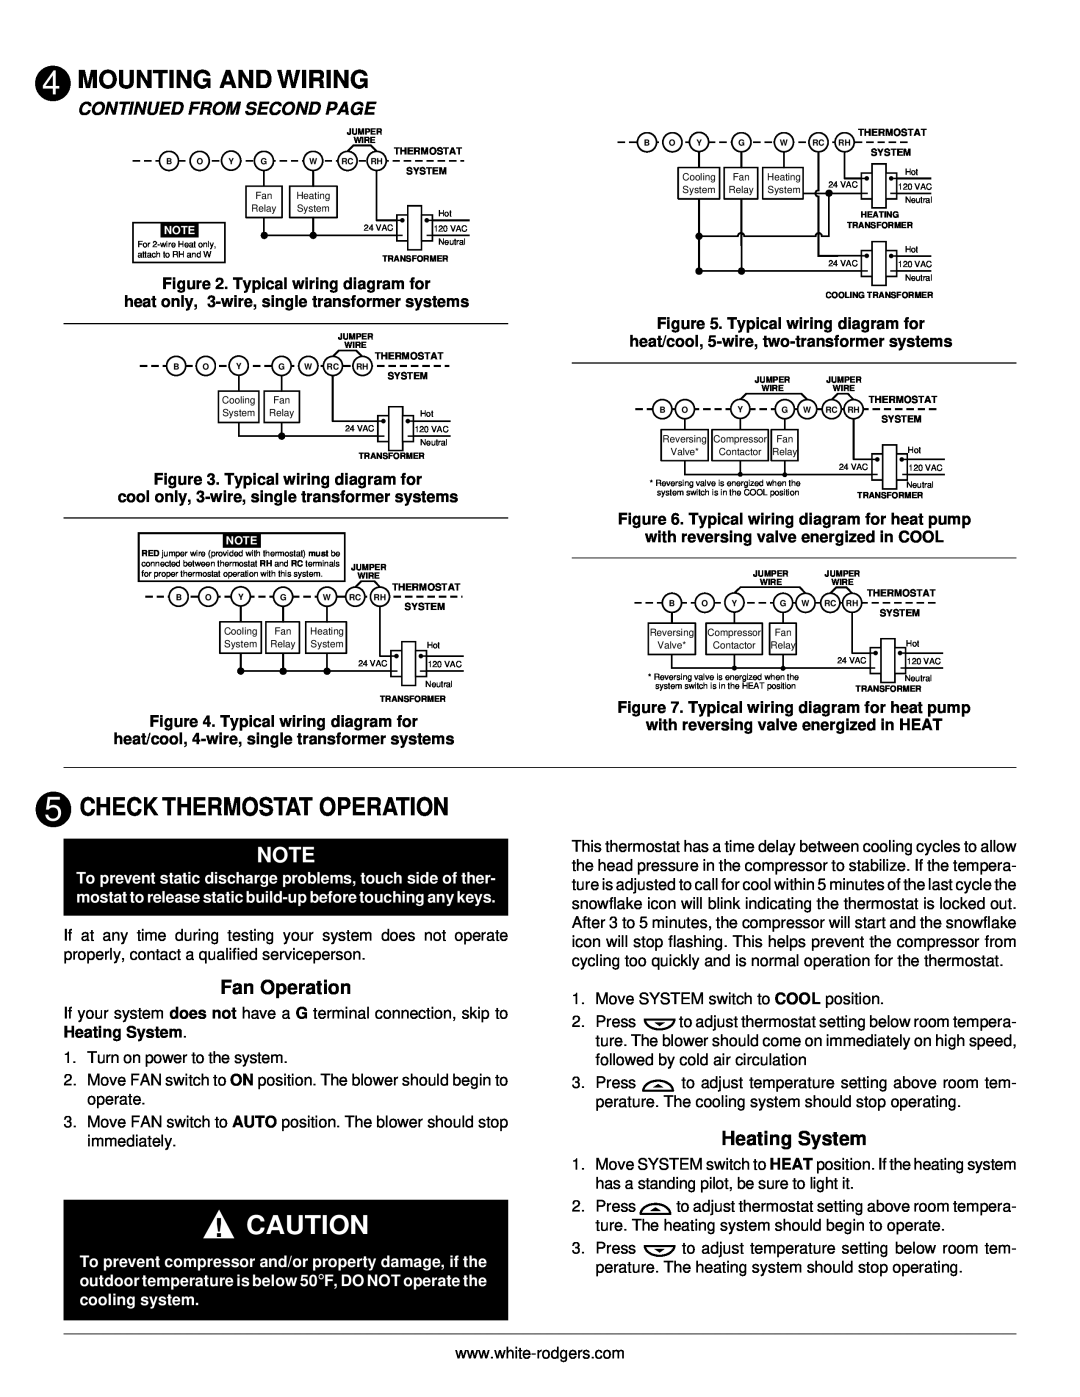 White Rodgers 750 Check Thermostat Operation, Fan Operation, Heating System, Continued From Second Page 